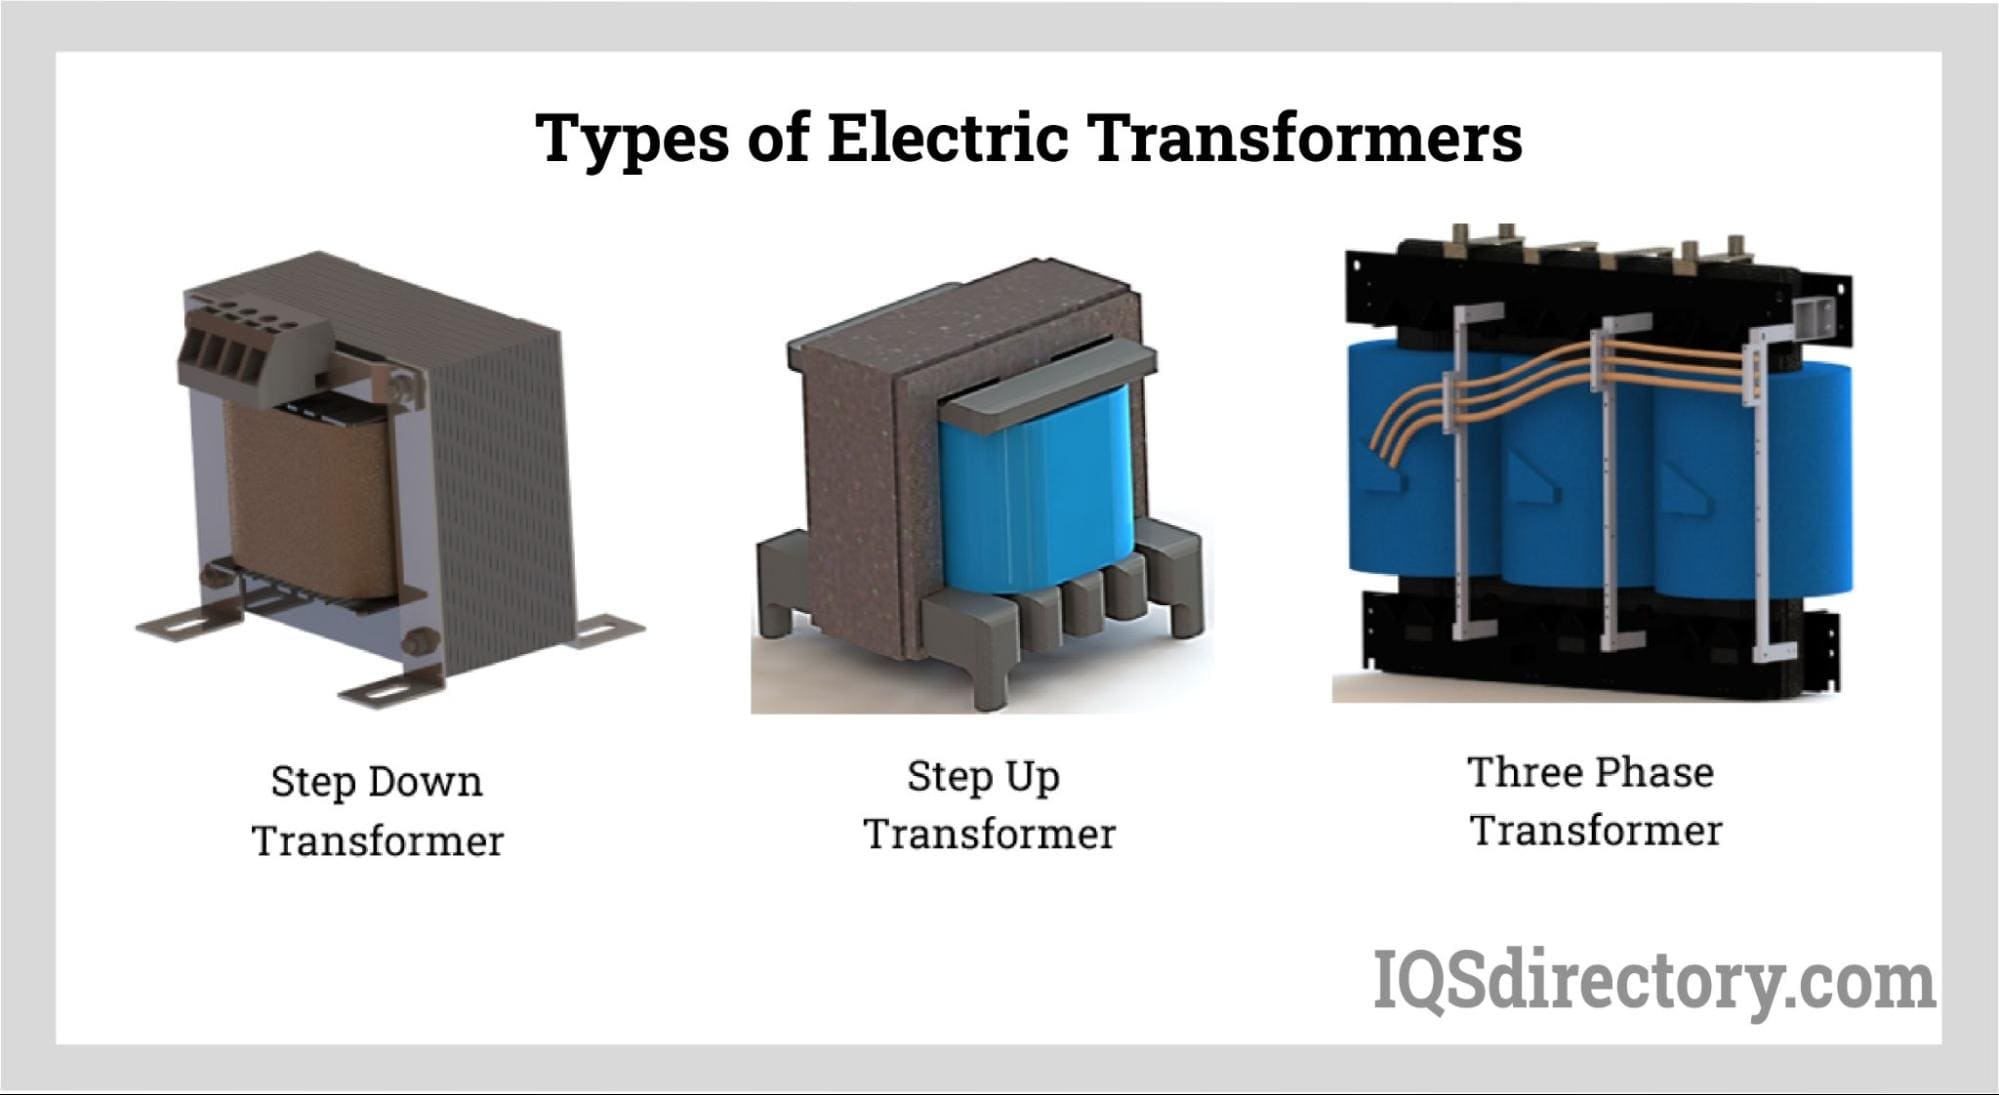 Types of Electric Transformers